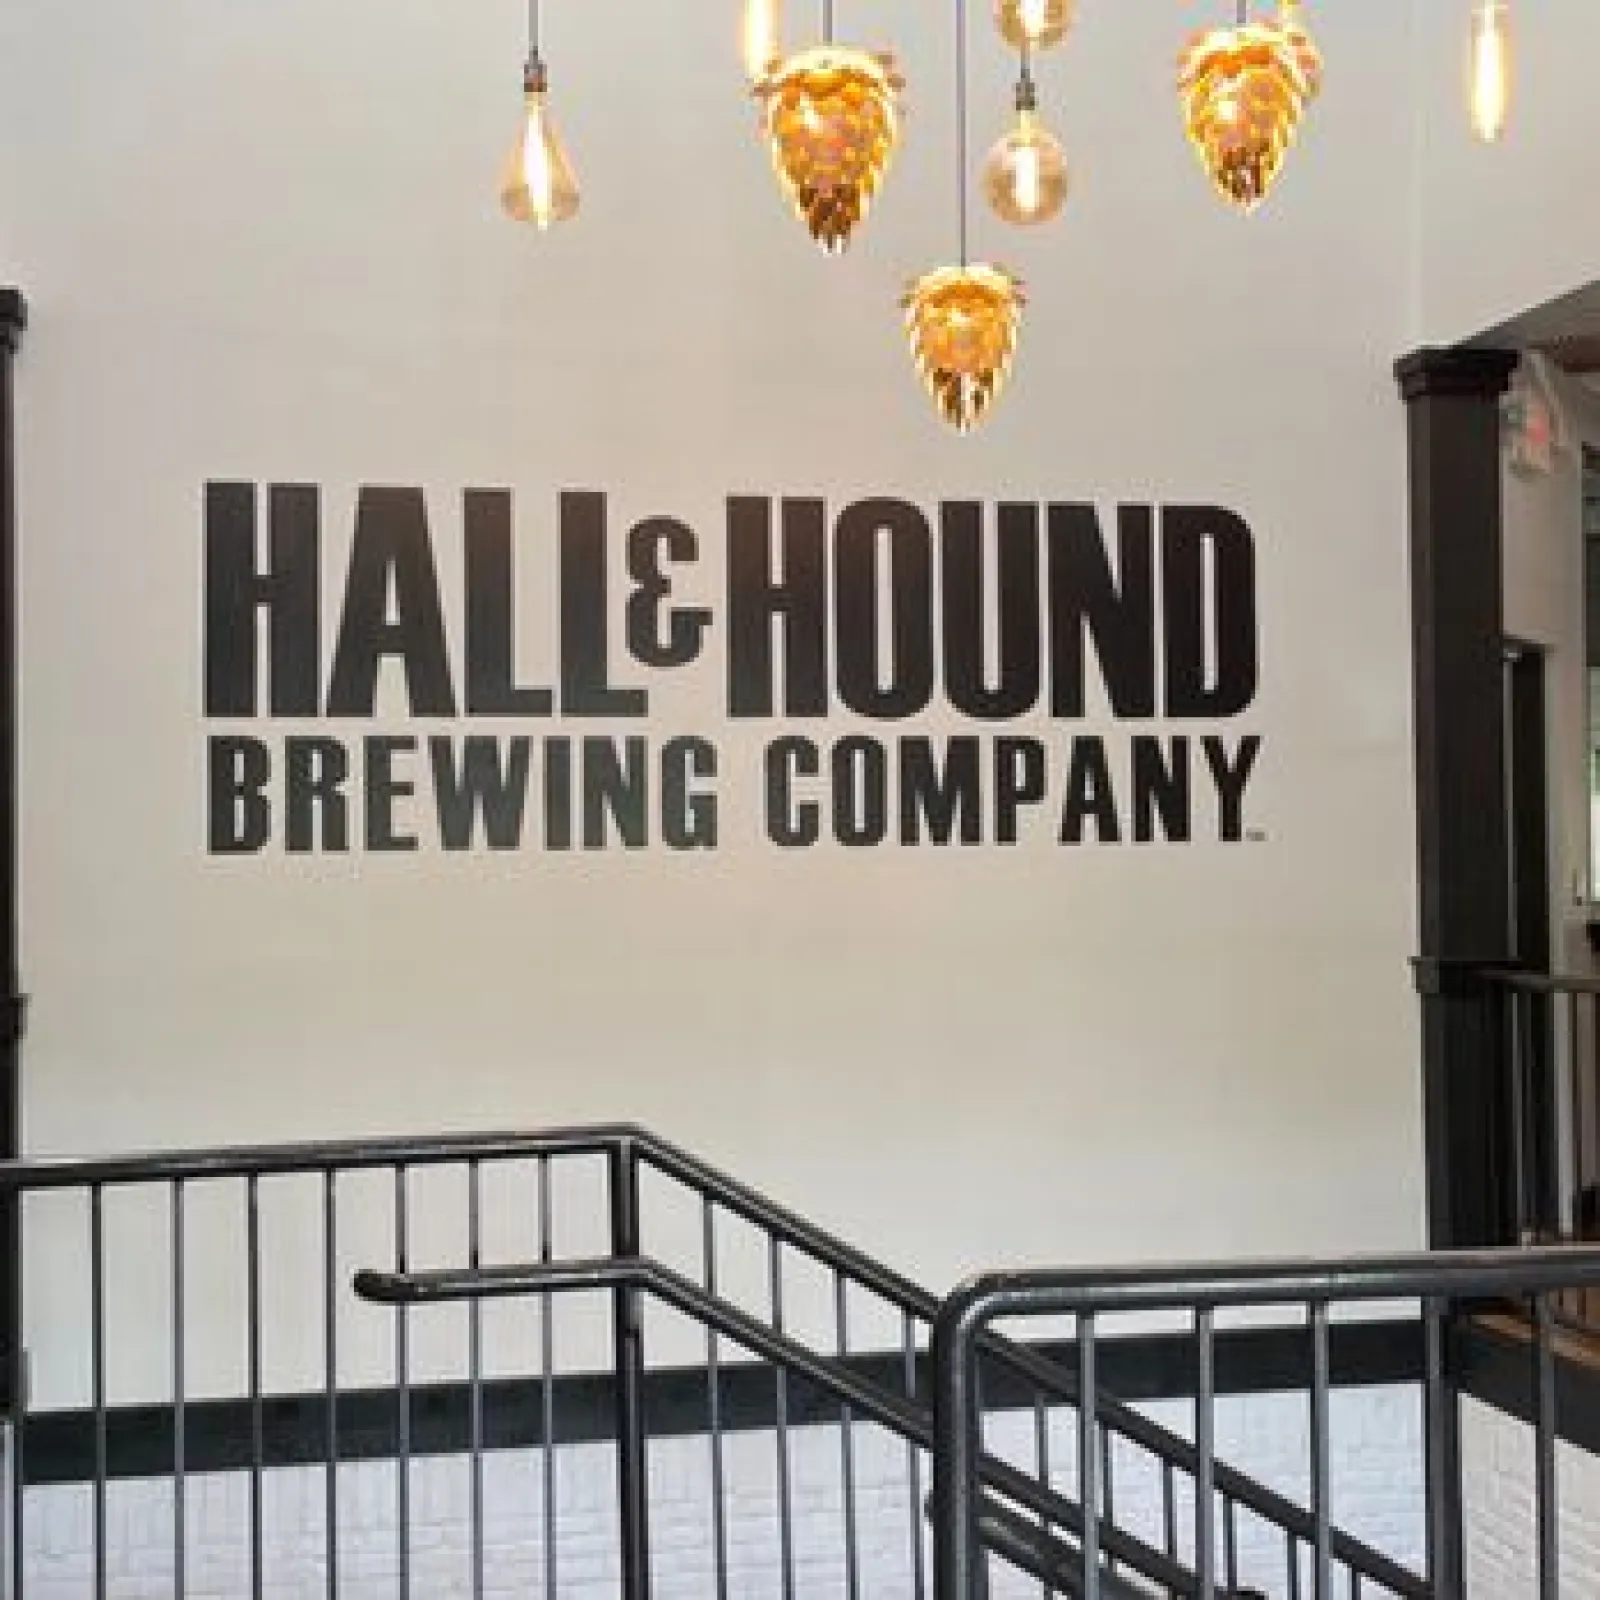 Hall & Hound Brewing Company, distance: 9.5 miles